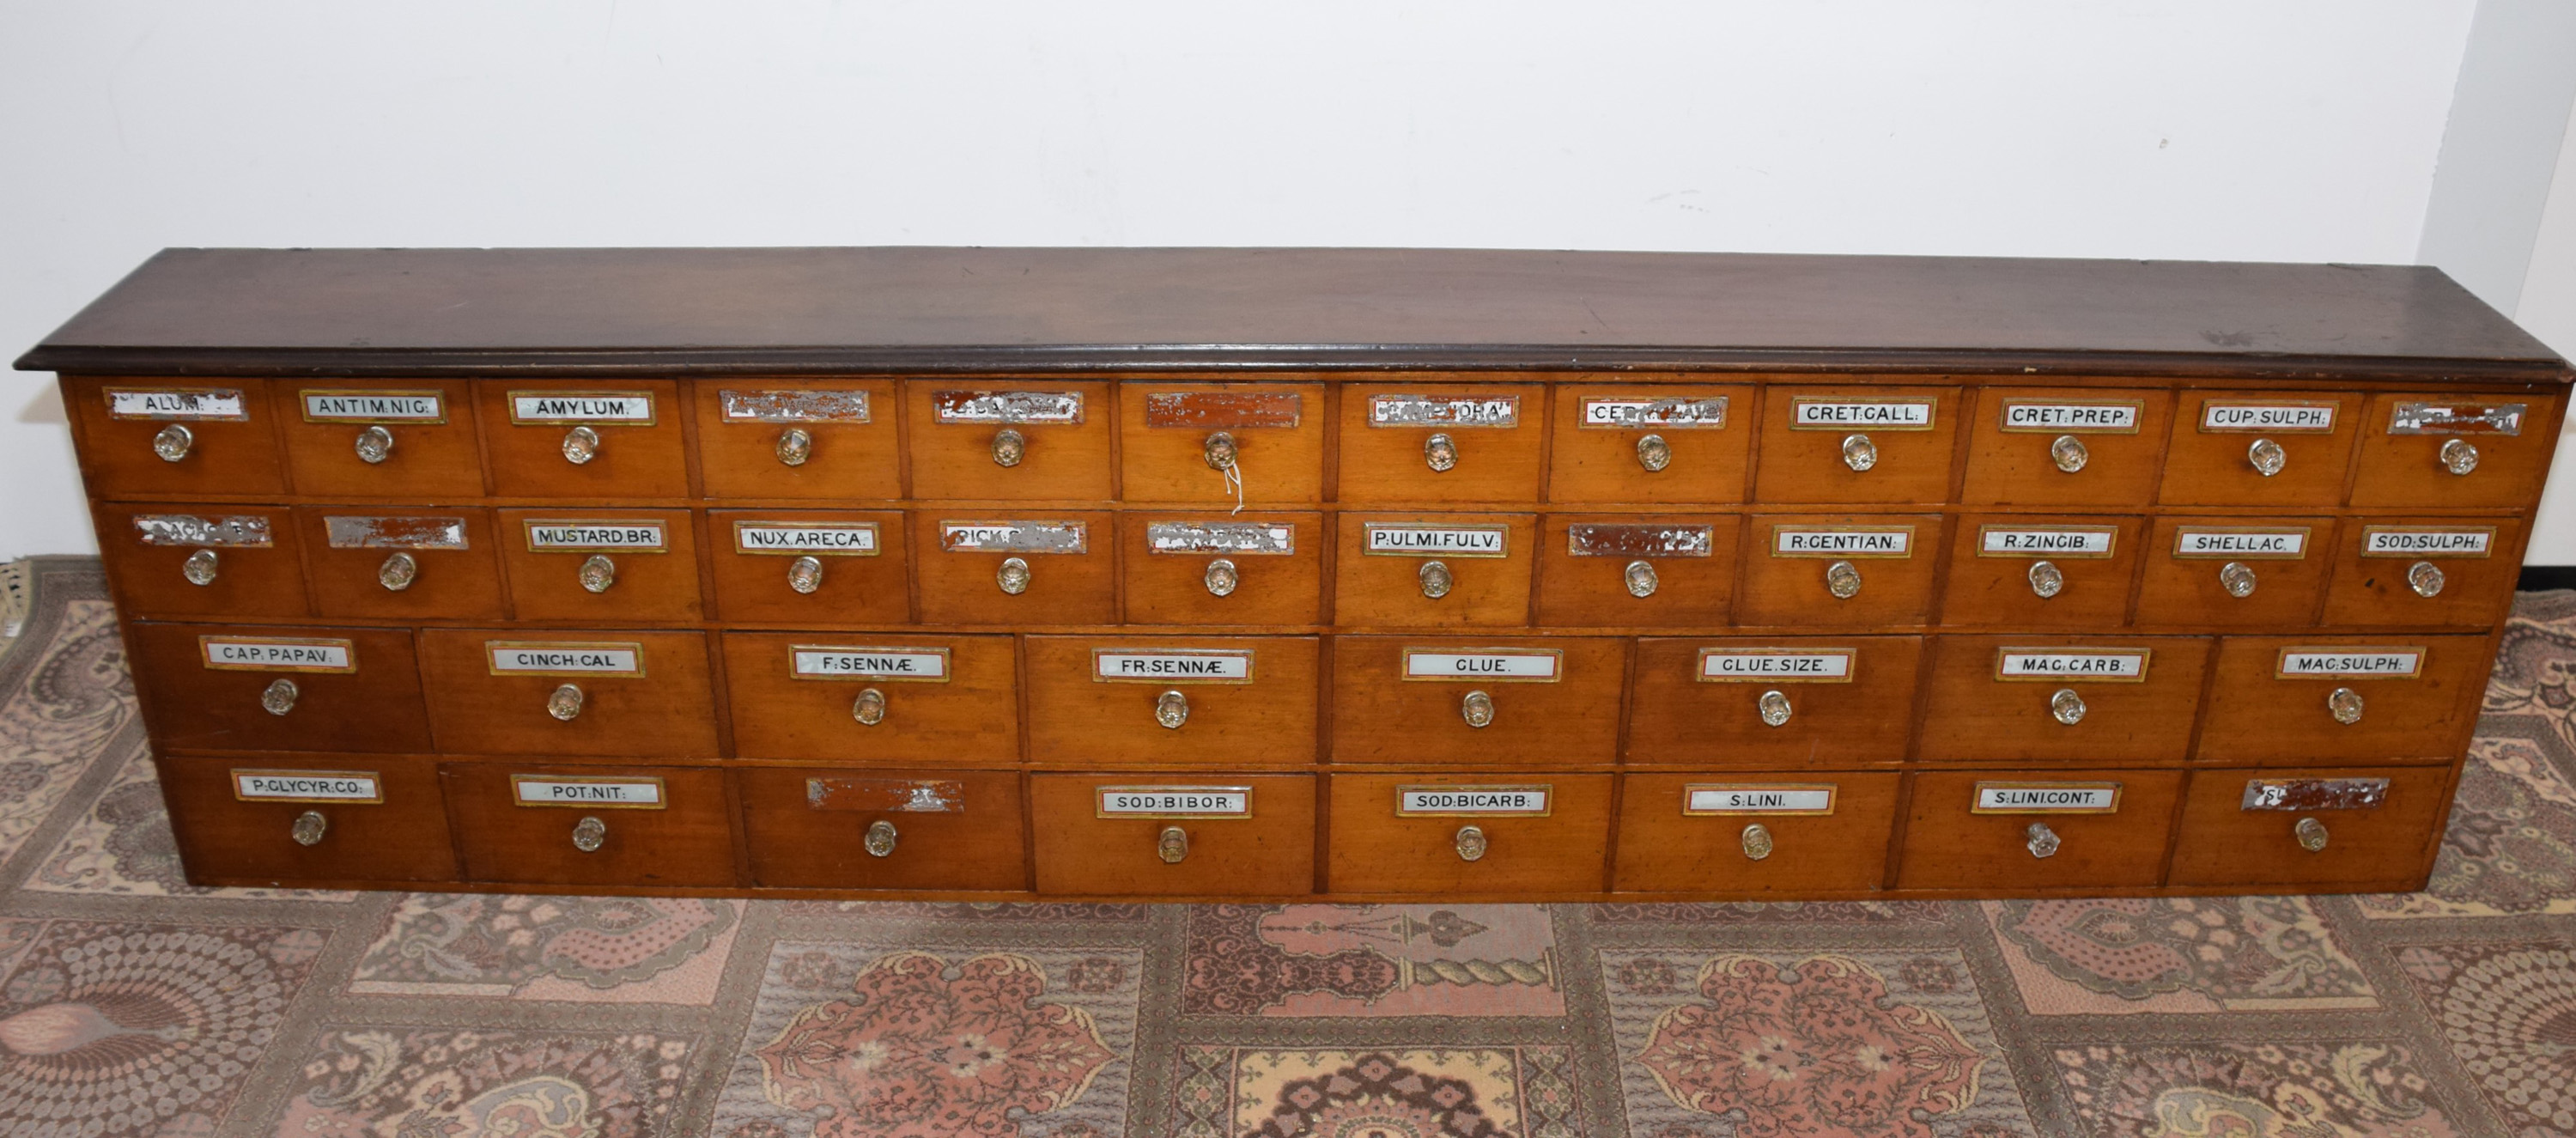 Lot 99 - A Victorian period mahogany apothecary drawer unit